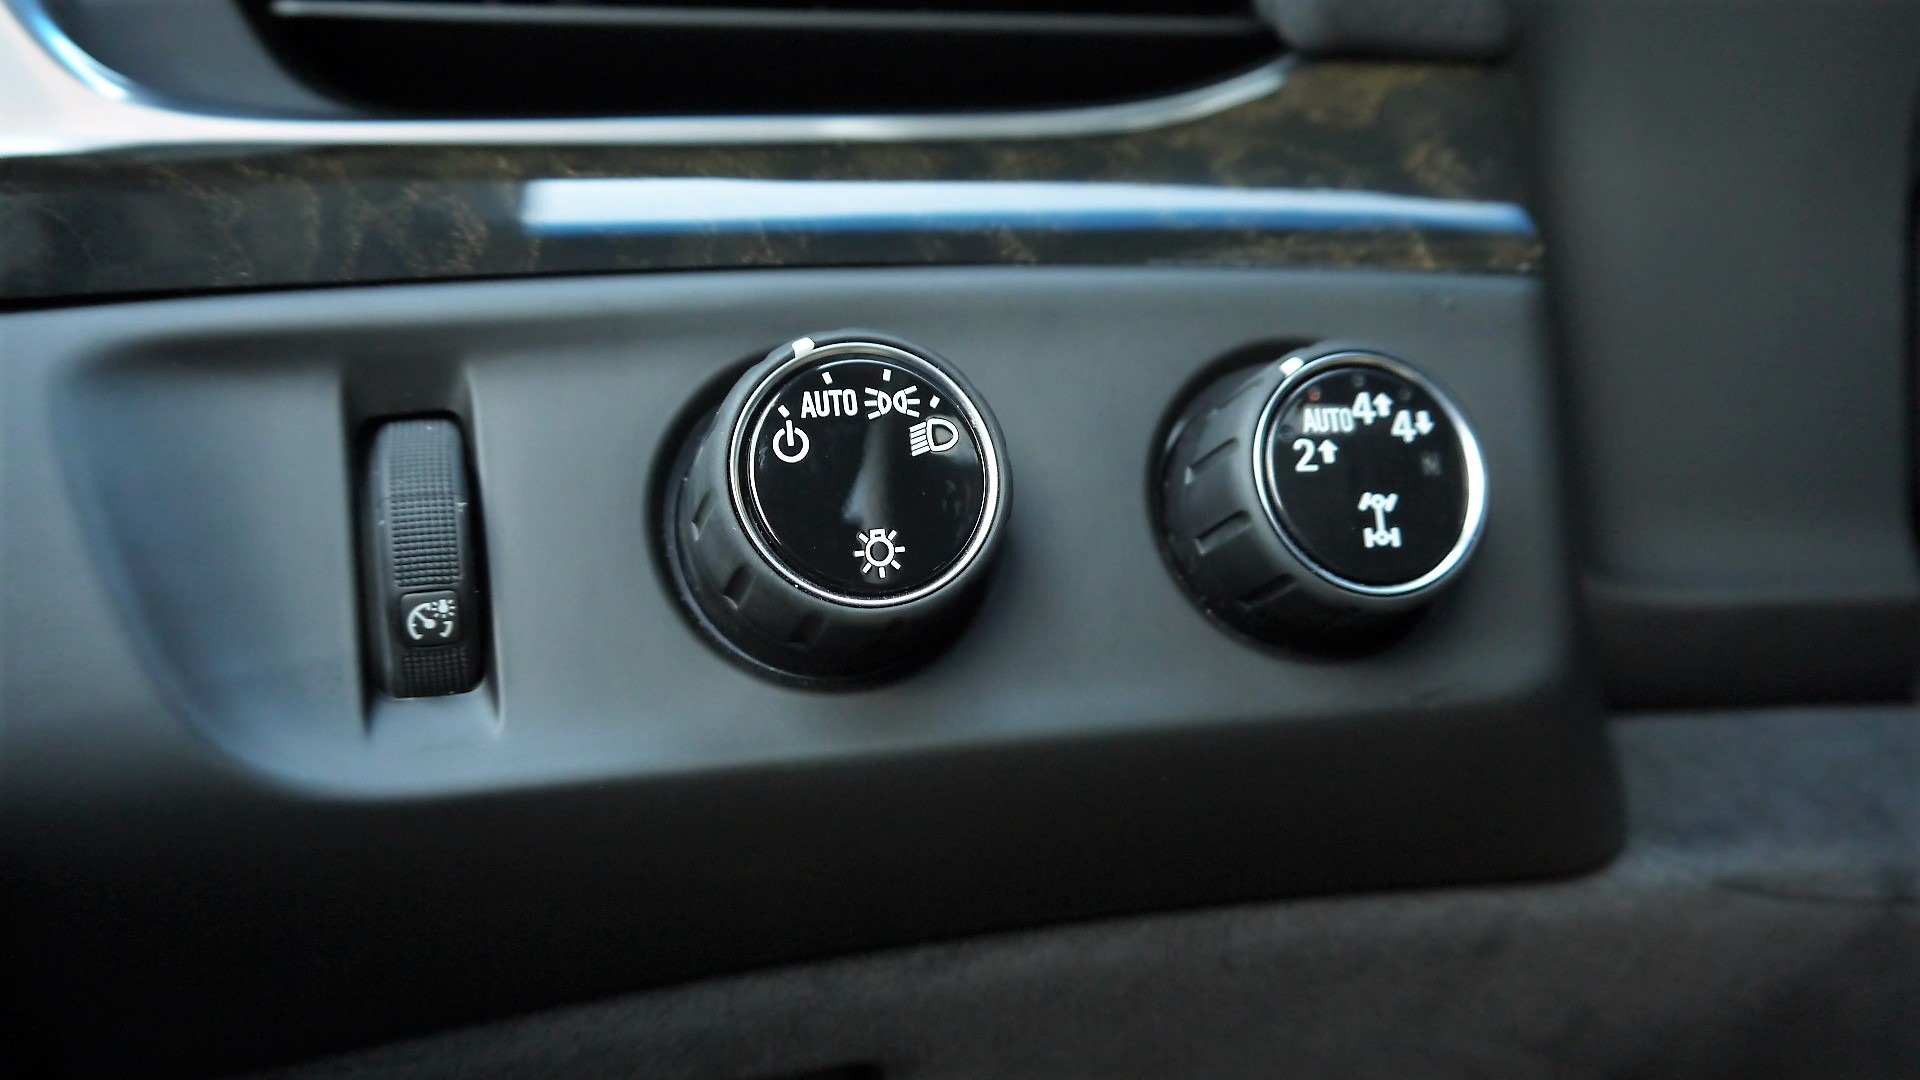 Fungsi traction control